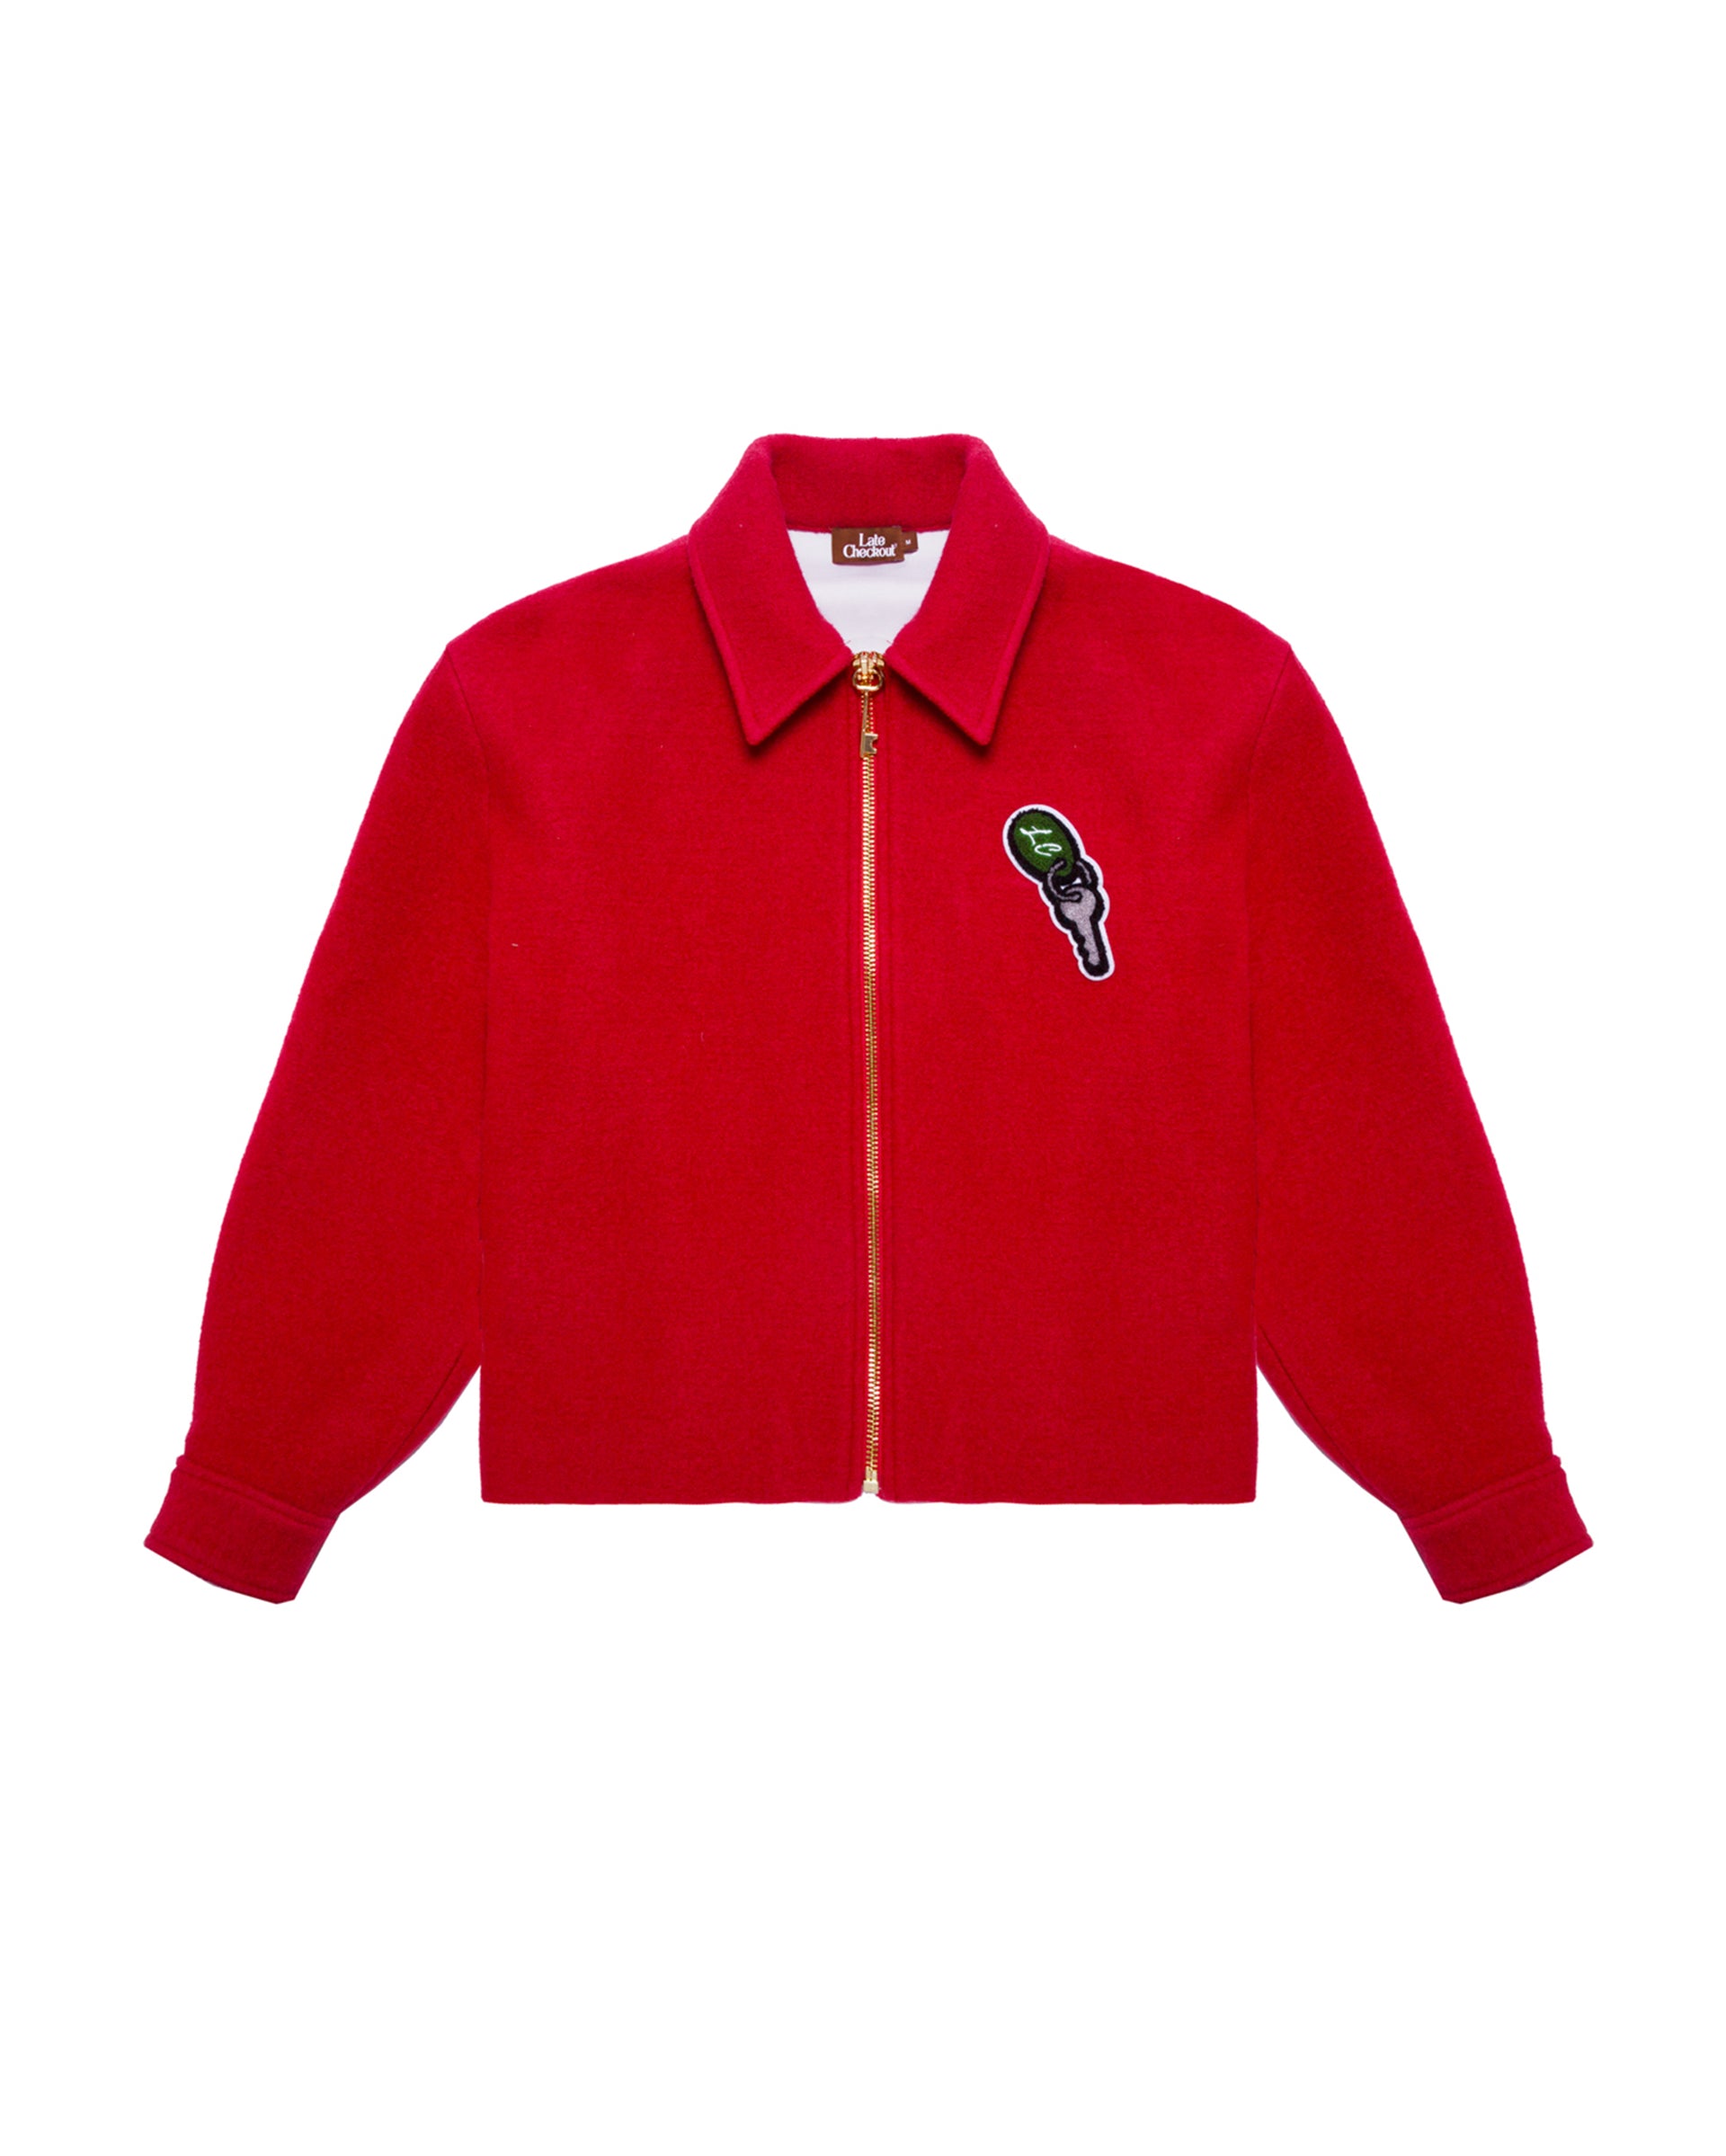 LATE CHECKOUT VALET ZIPPER JACKET RED